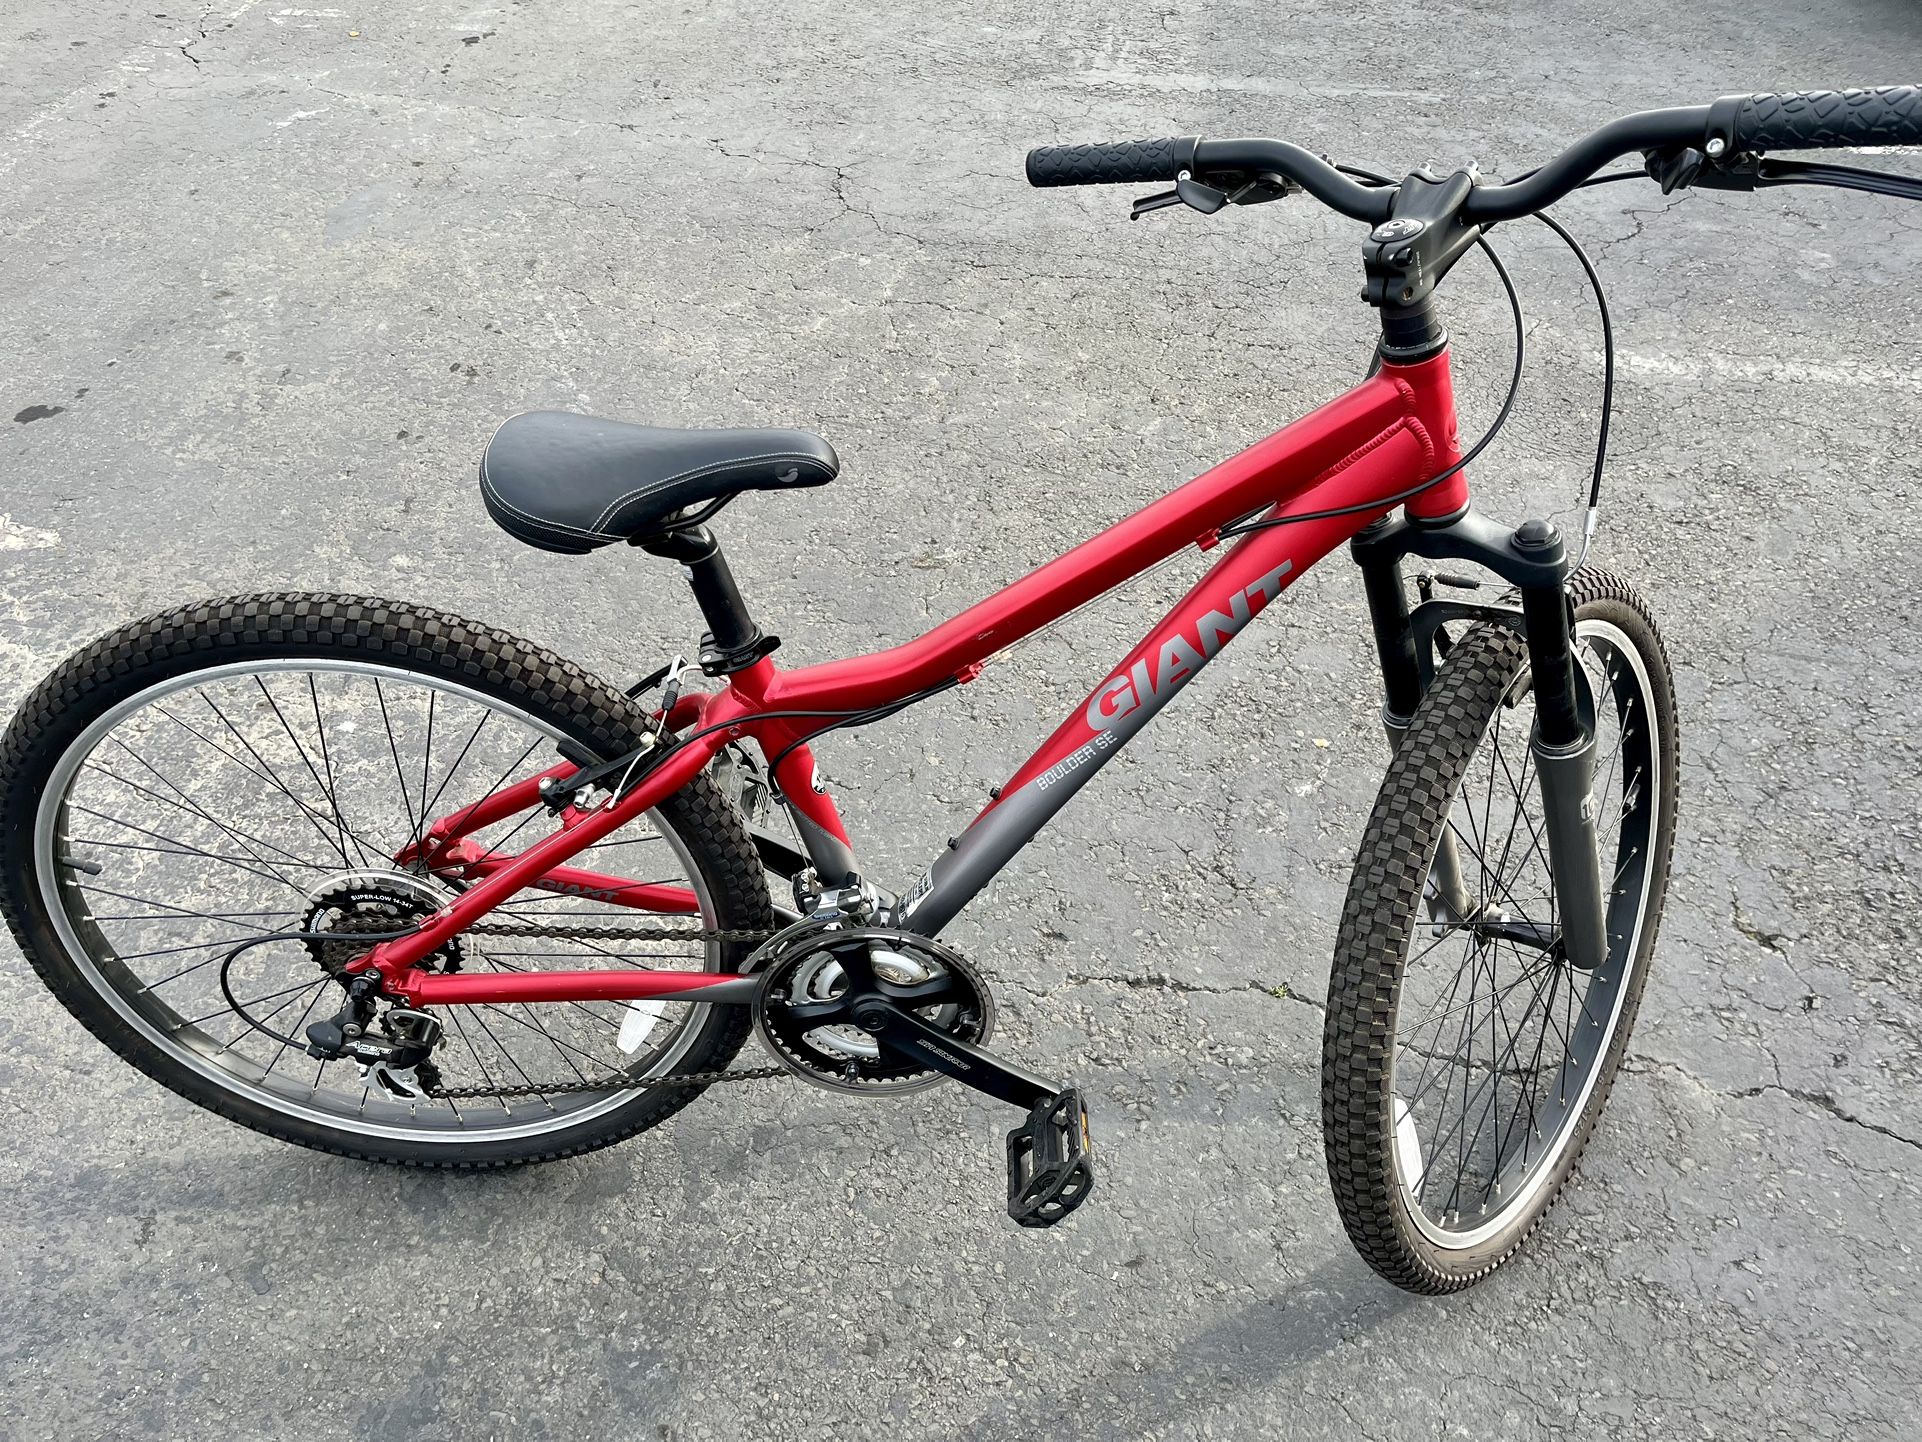 Red Giant Commuter Bike 